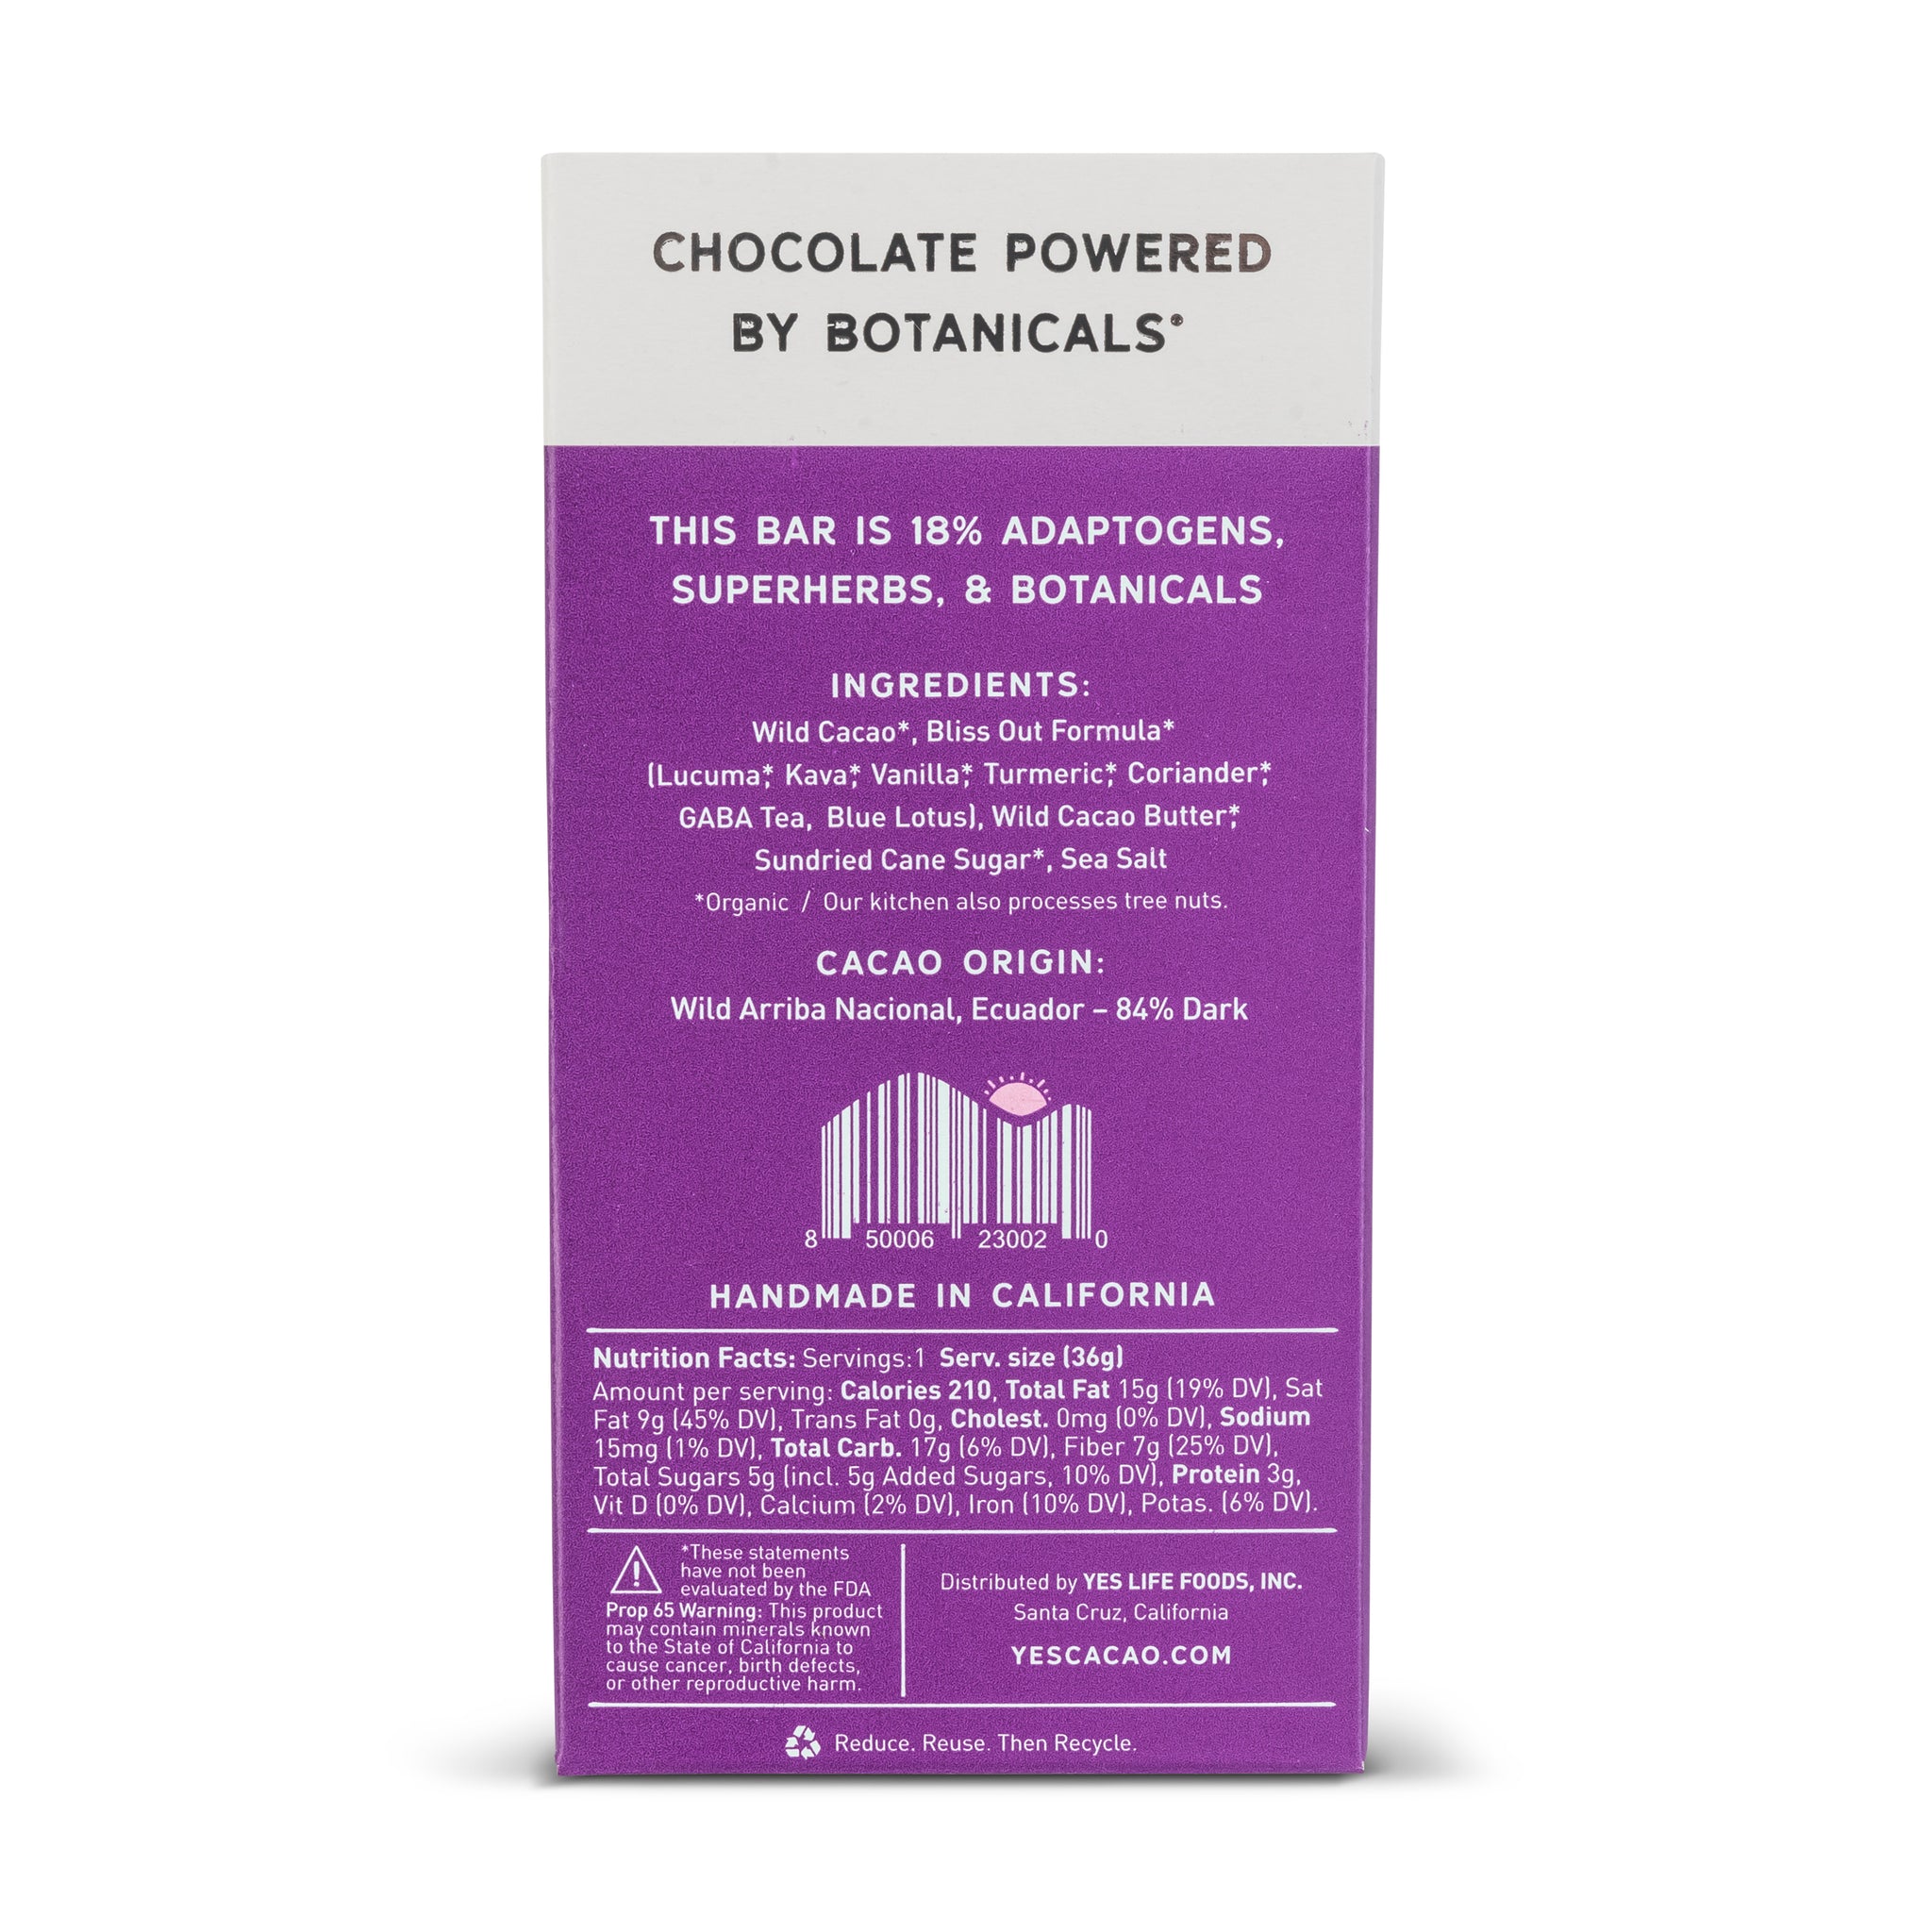 BLISS OUT Botanical Chocolate®